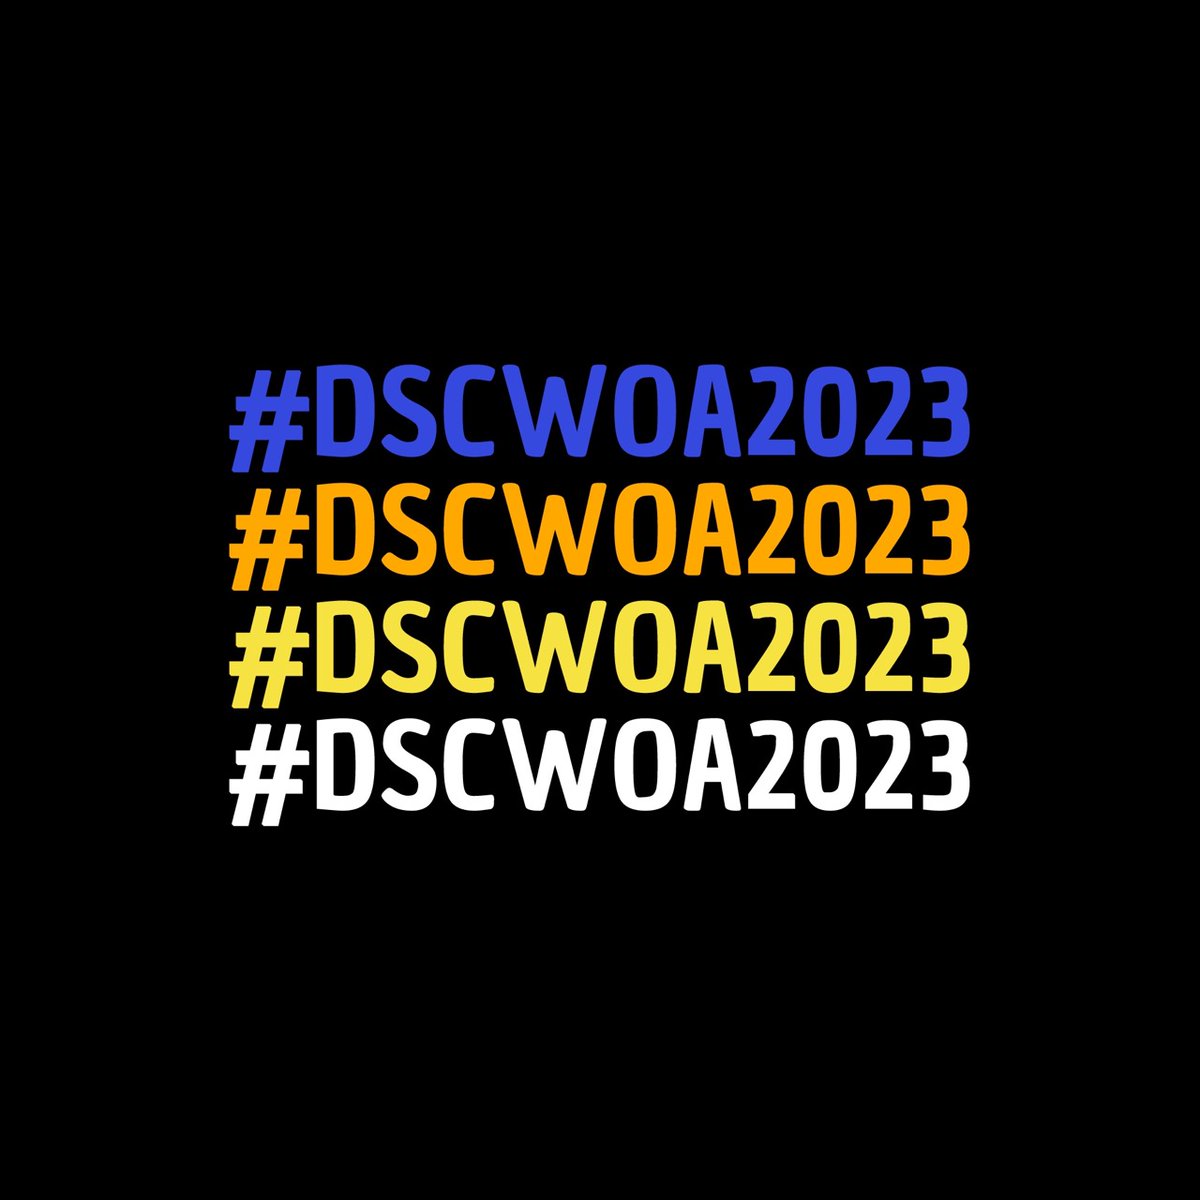 Getting ready for next week's National Week of Action Against School Pushout. #DSCWoA2023 #theCADREway